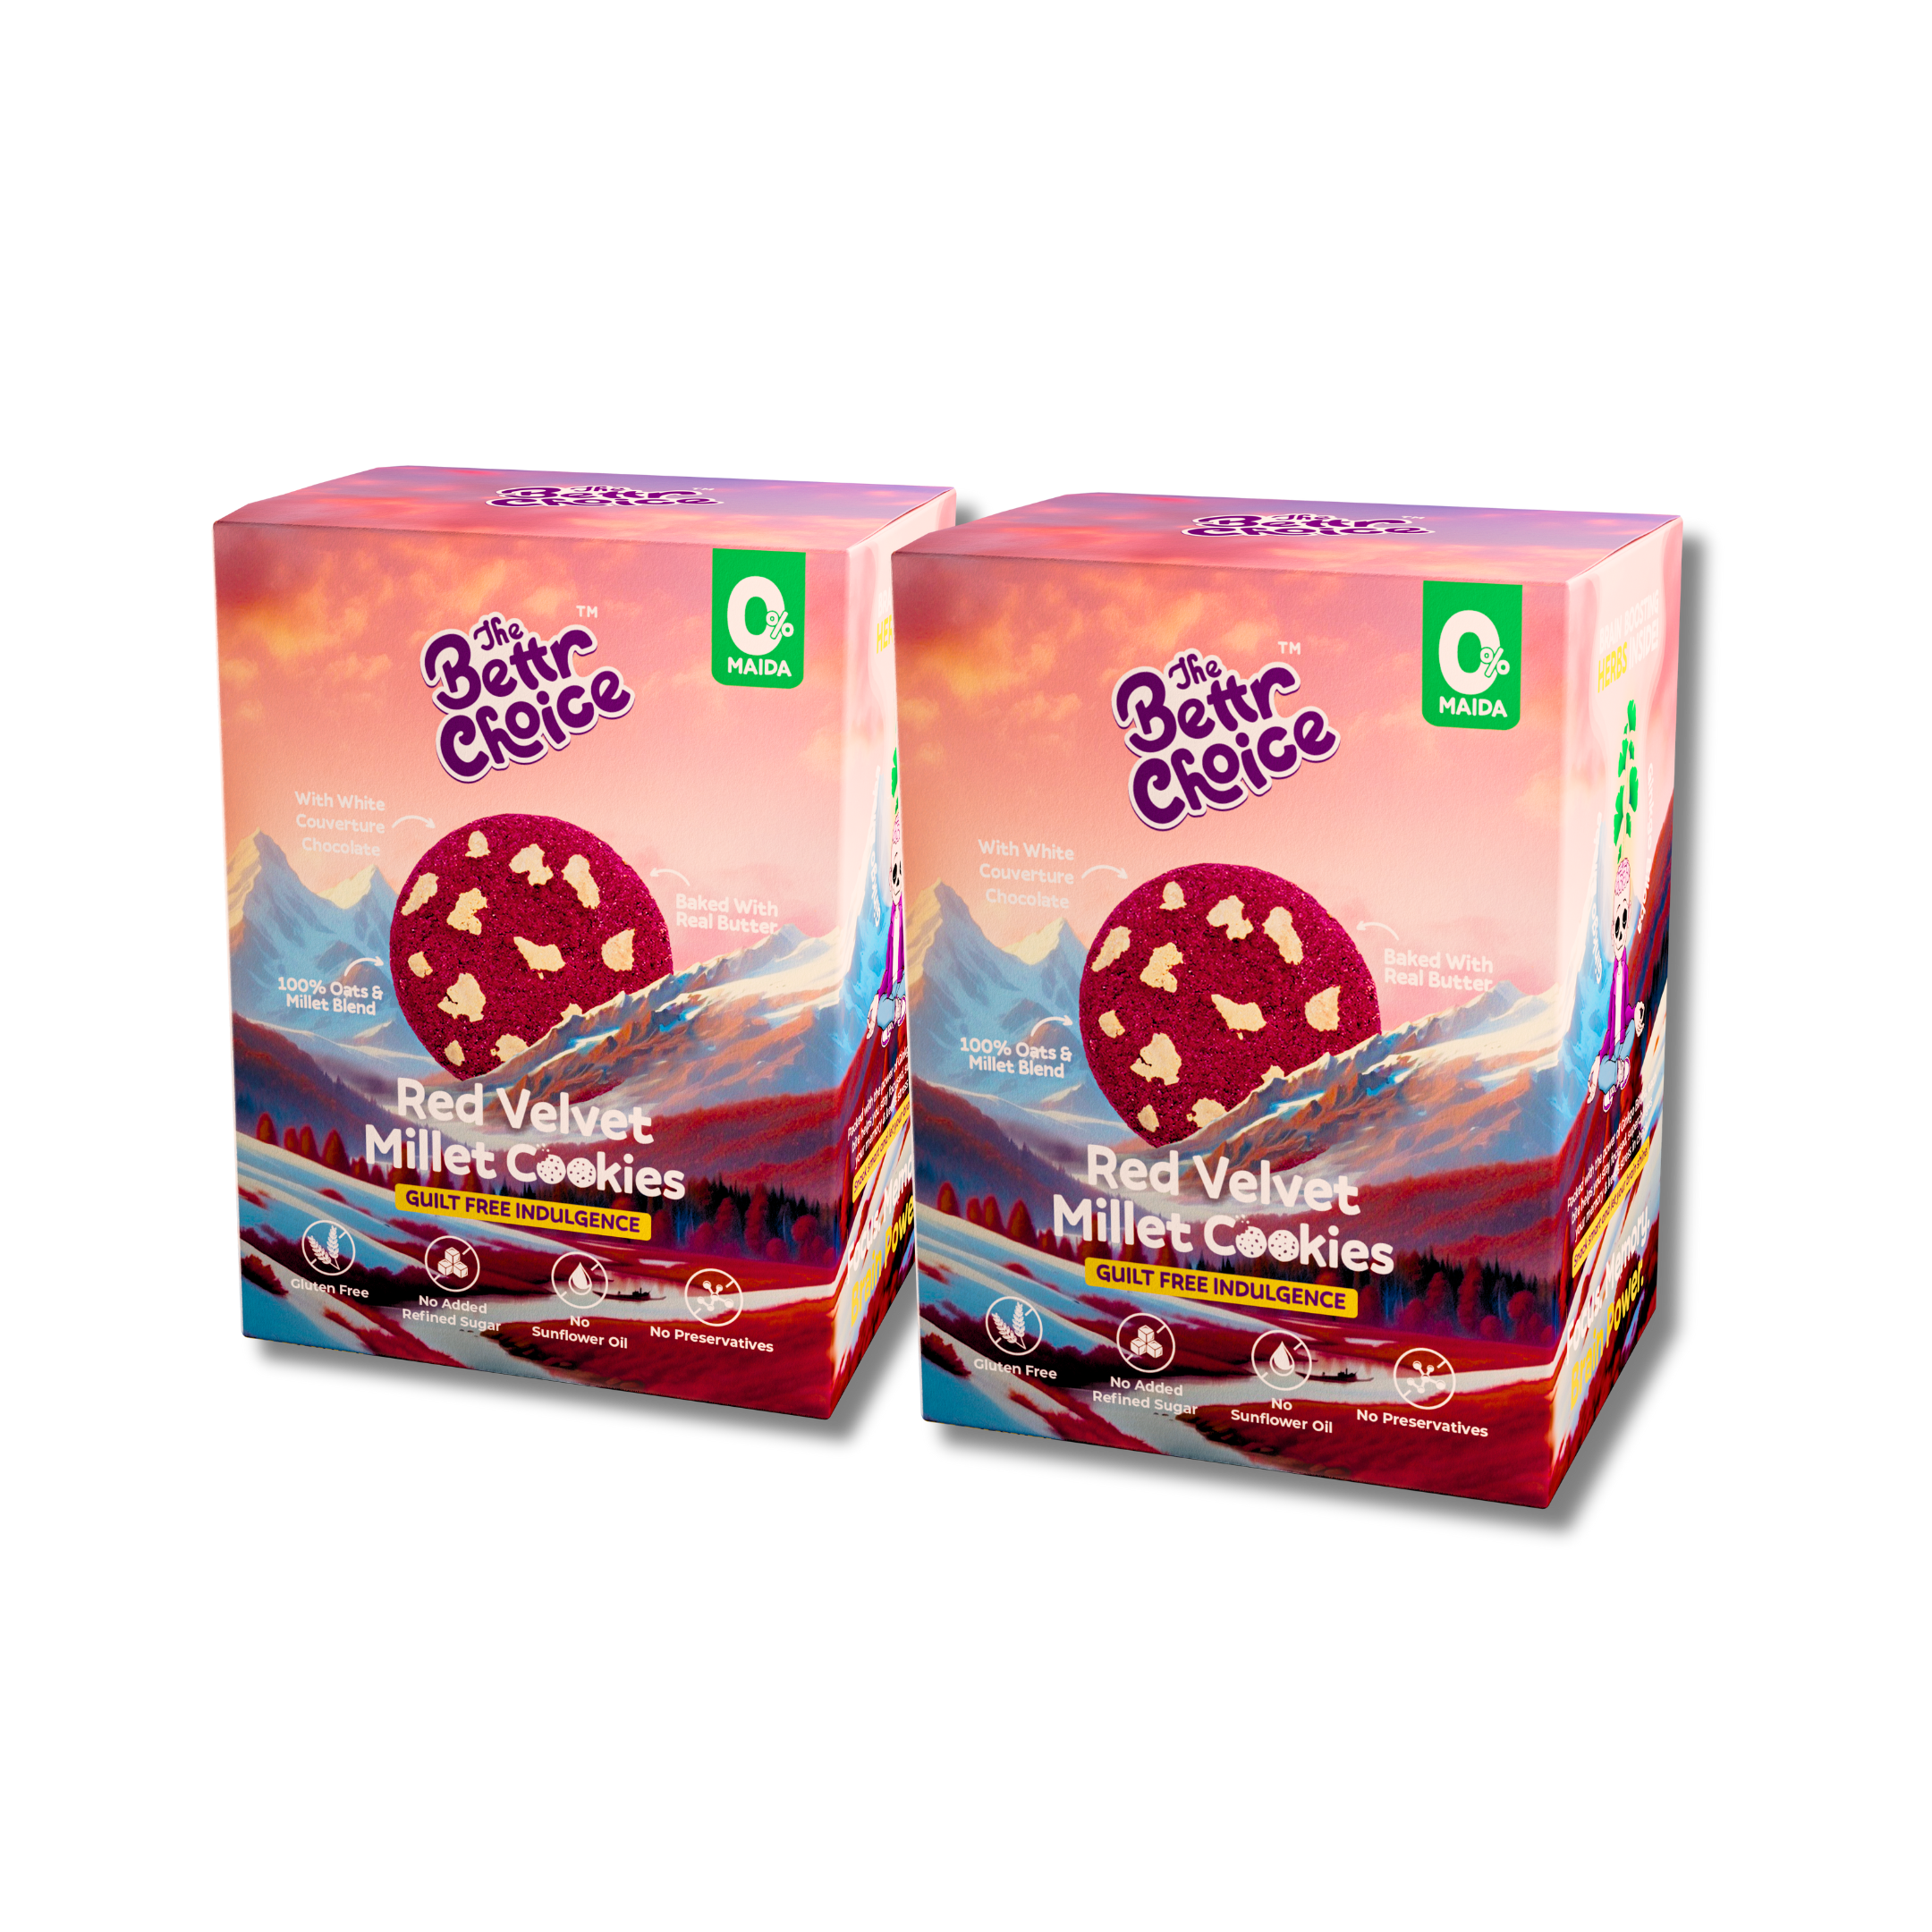 The Bettr Choice Red Velvet Millet Cookies: 100% Whole Grain Blend (Ragi & Oats), Natural Butter, Beetroot Powder, Organic Jaggery, Ginkgo Biloba, No Added Refined Sugar - Healthy Snack - 2 Pack